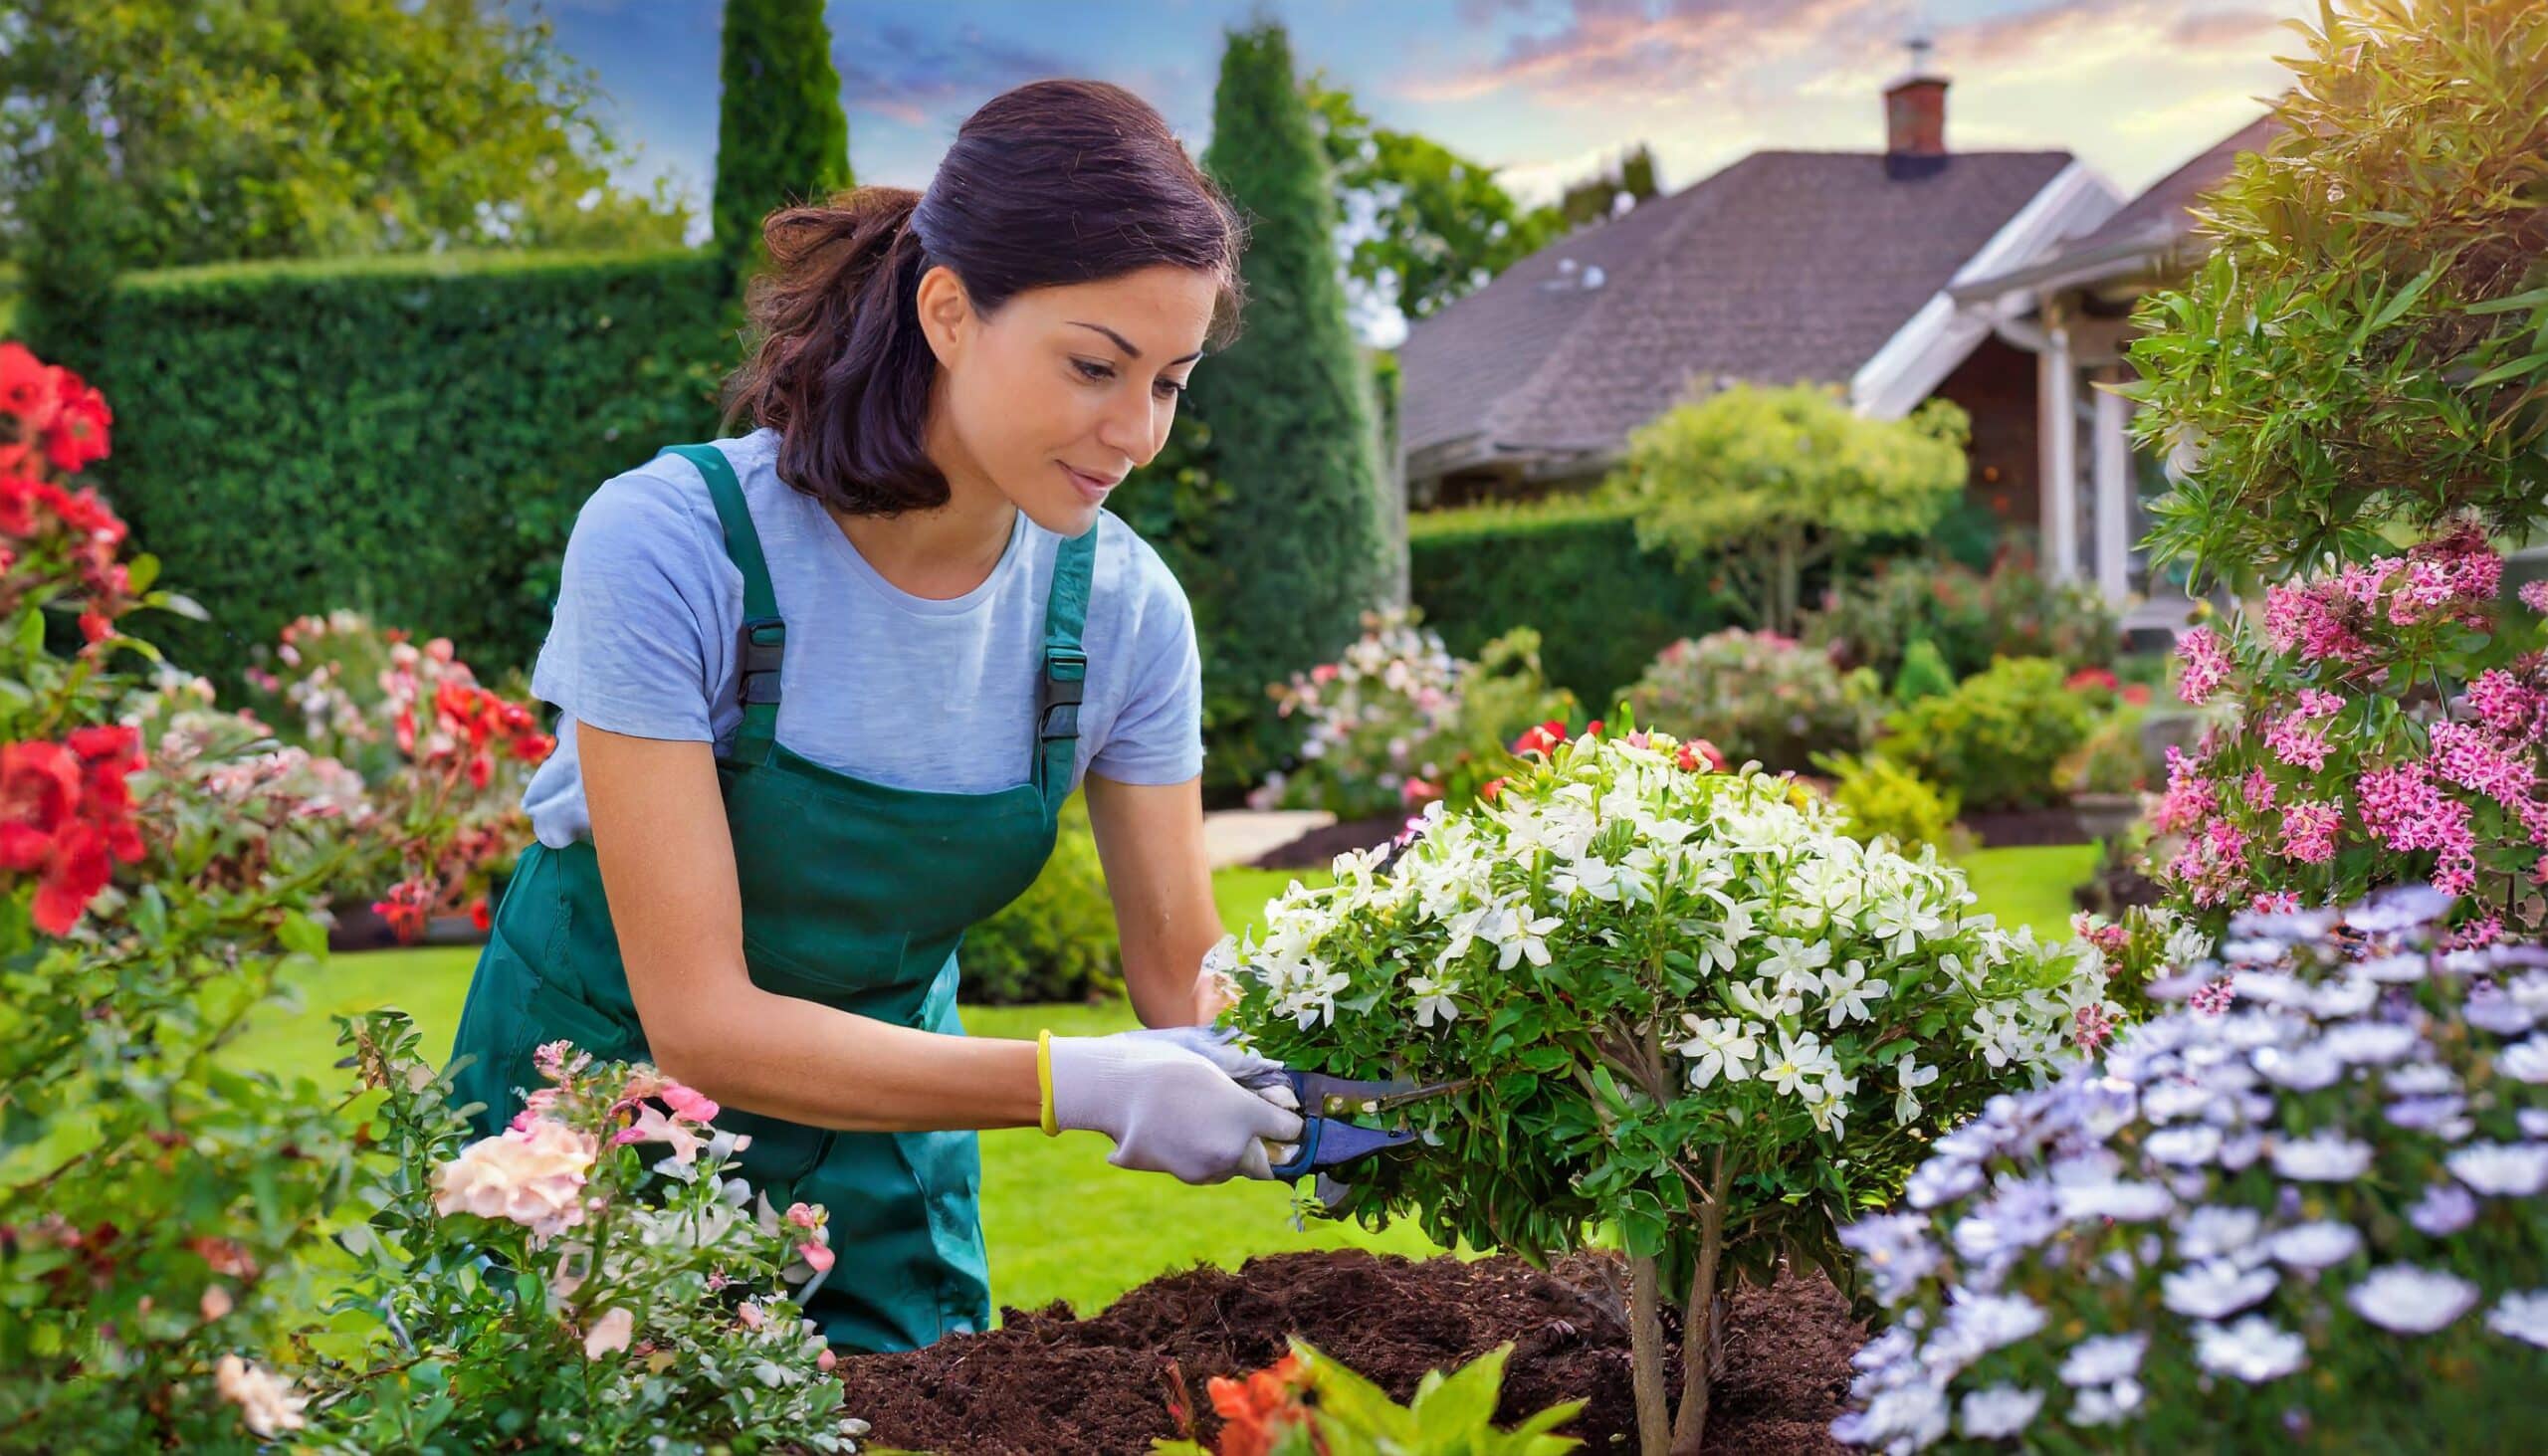 Top Rated Helpers For Your Garden